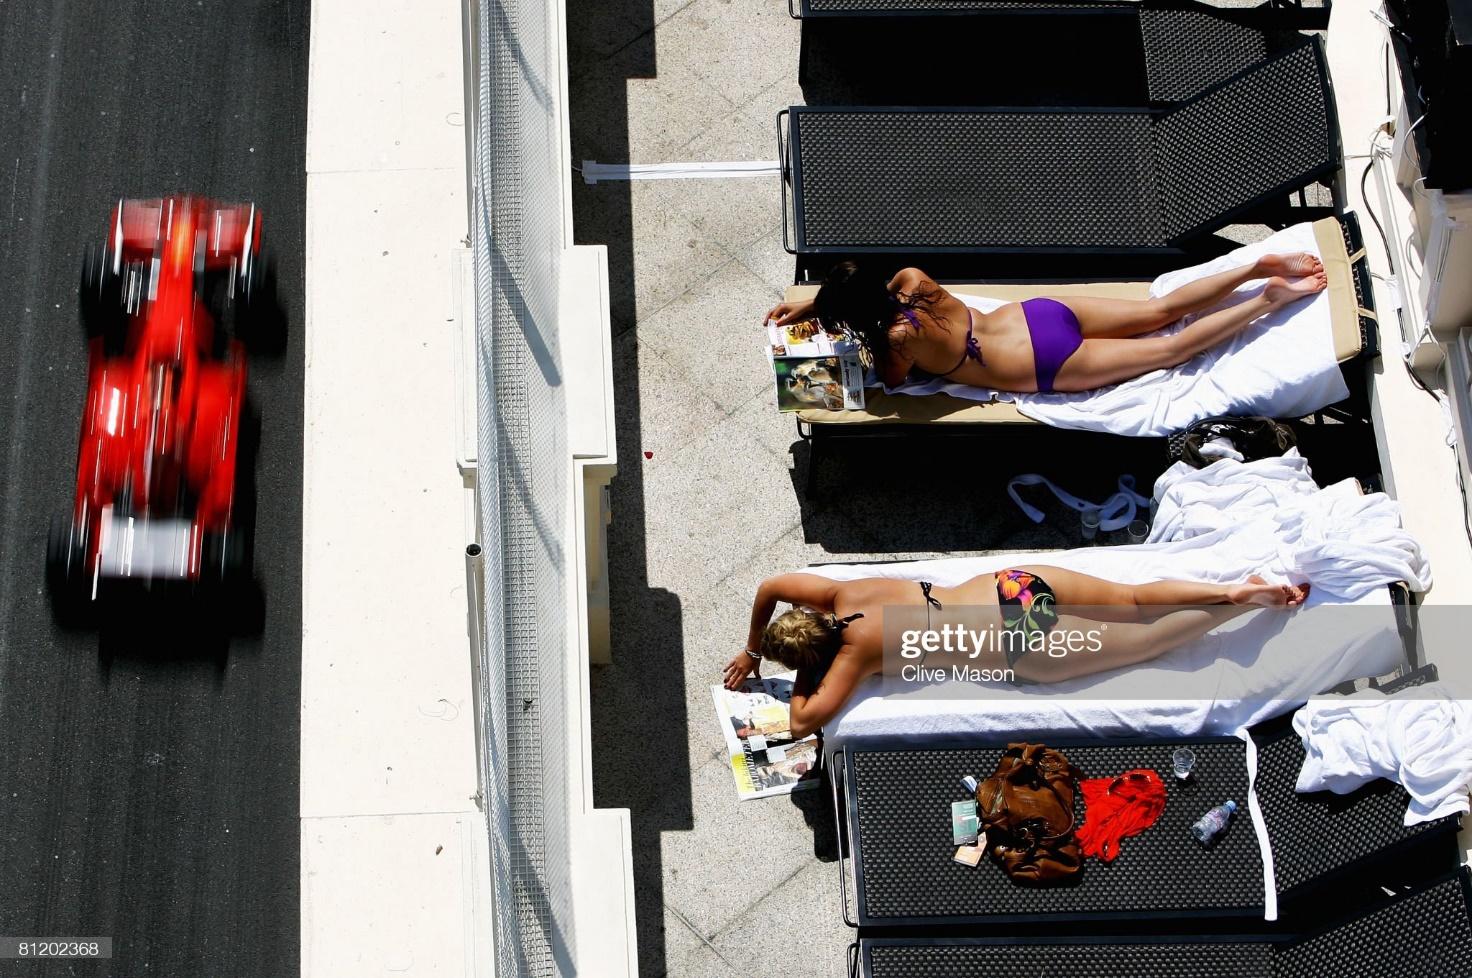 Sunbathers relax as Kimi Raikkonen drives by during practice for the Monaco F1 Grand Prix at the Monte Carlo Circuit on May 22, 2008.